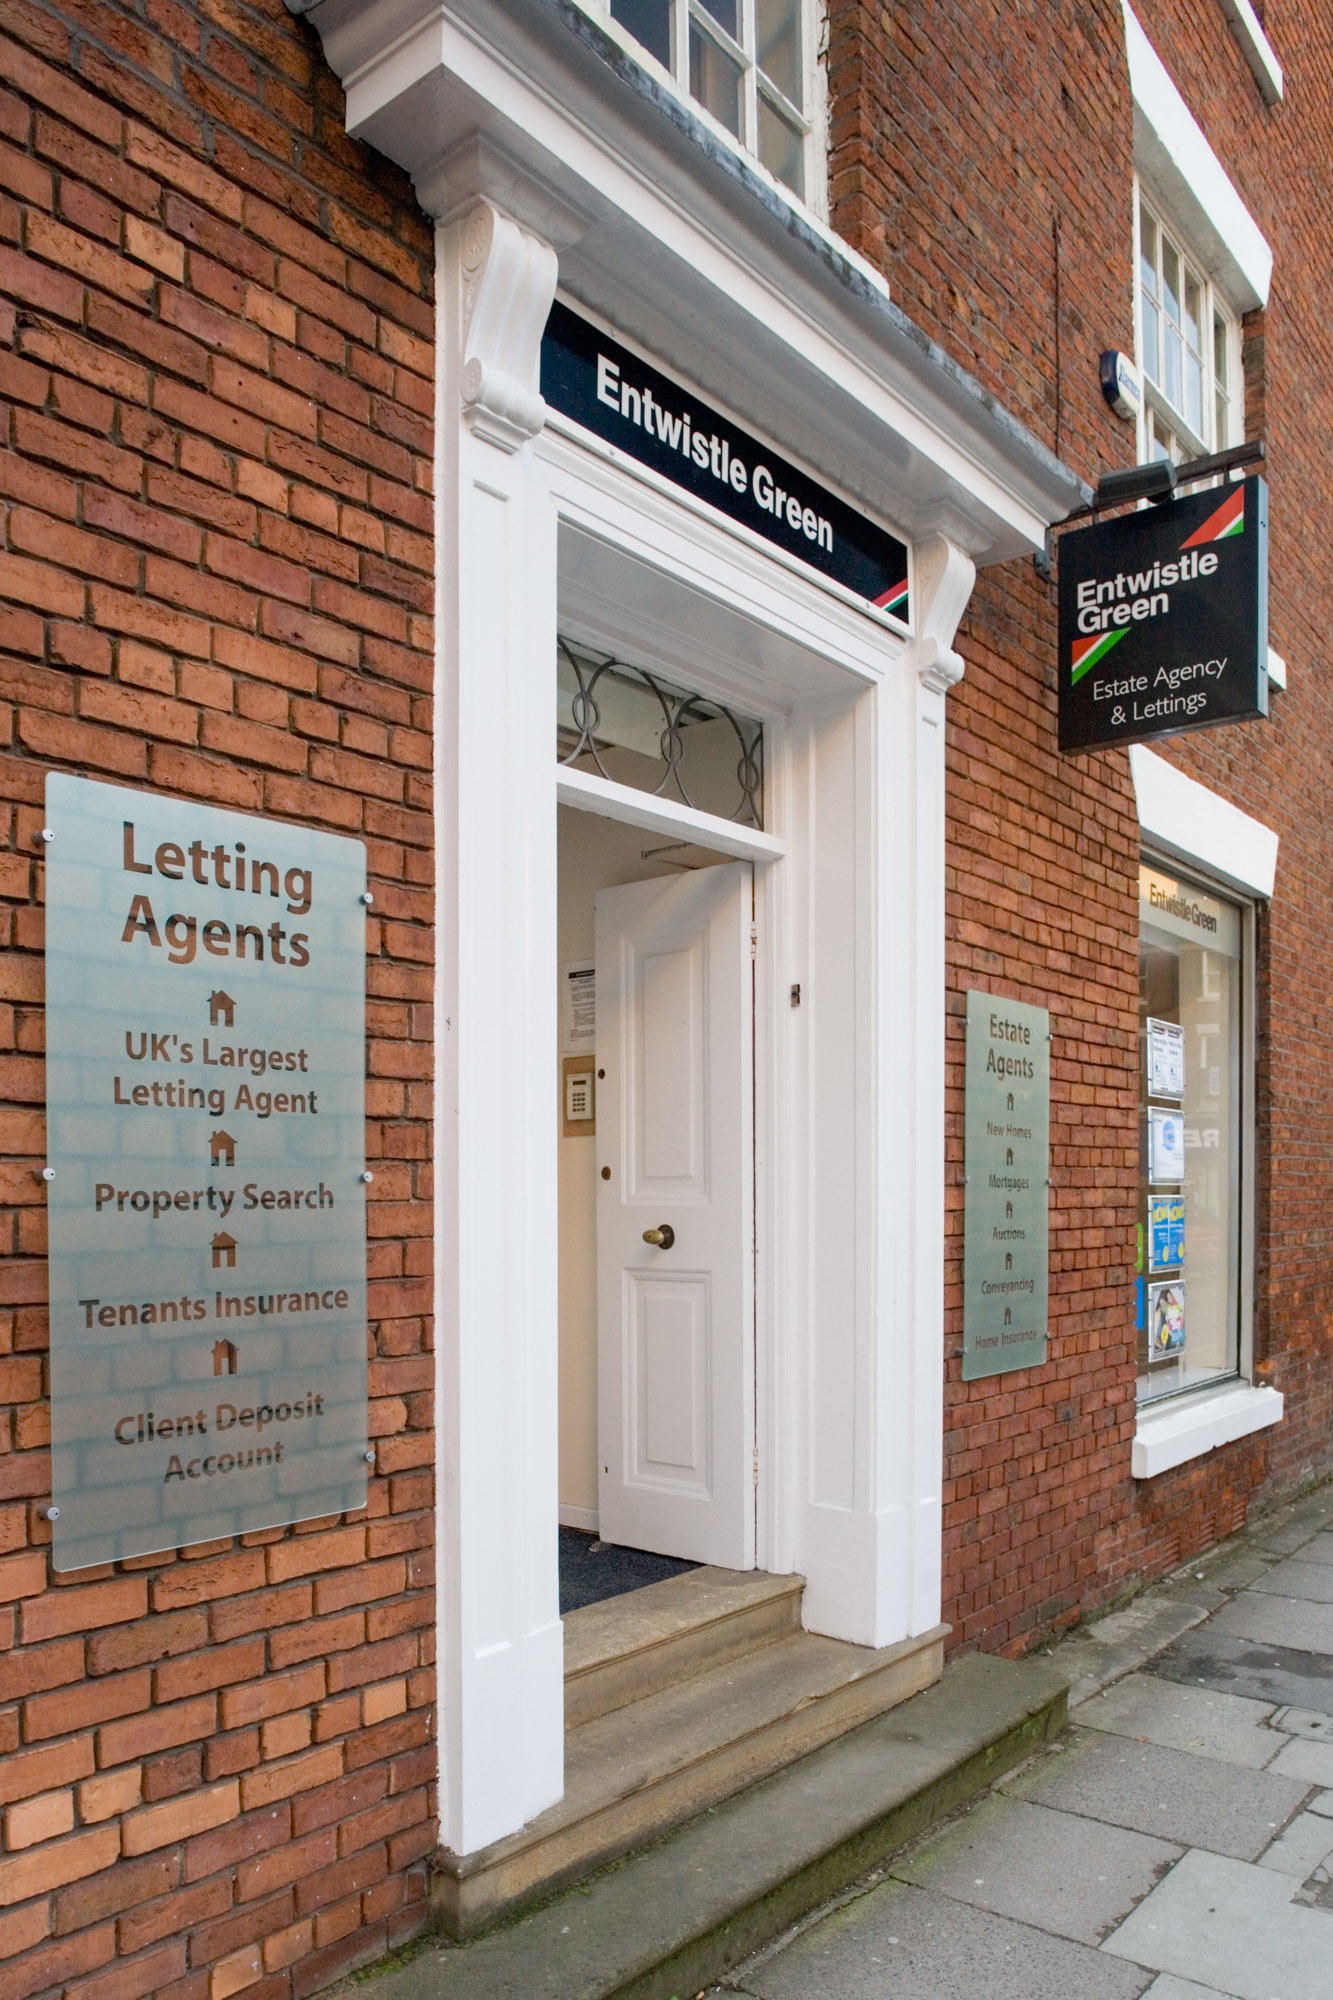 Images Entwistle Green Sales and Letting Agents Preston